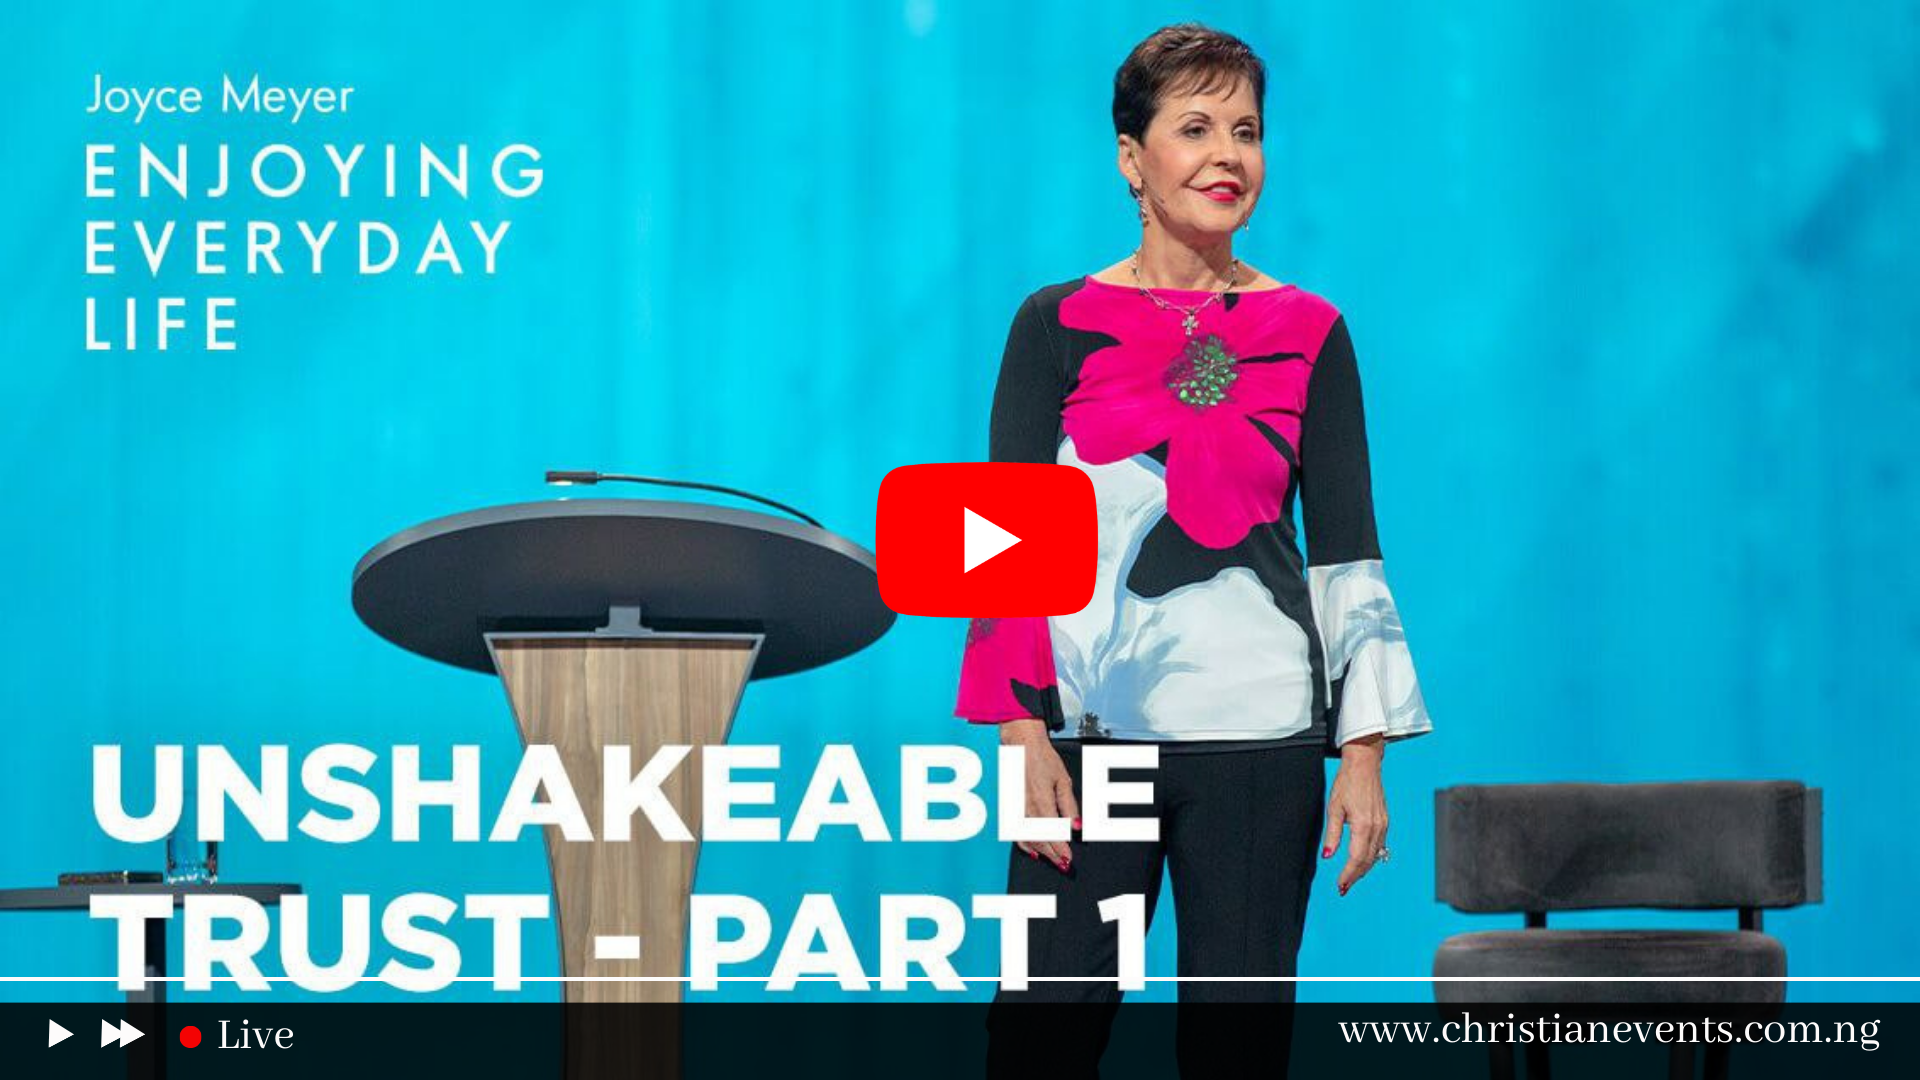 At home with Joyce Meyer